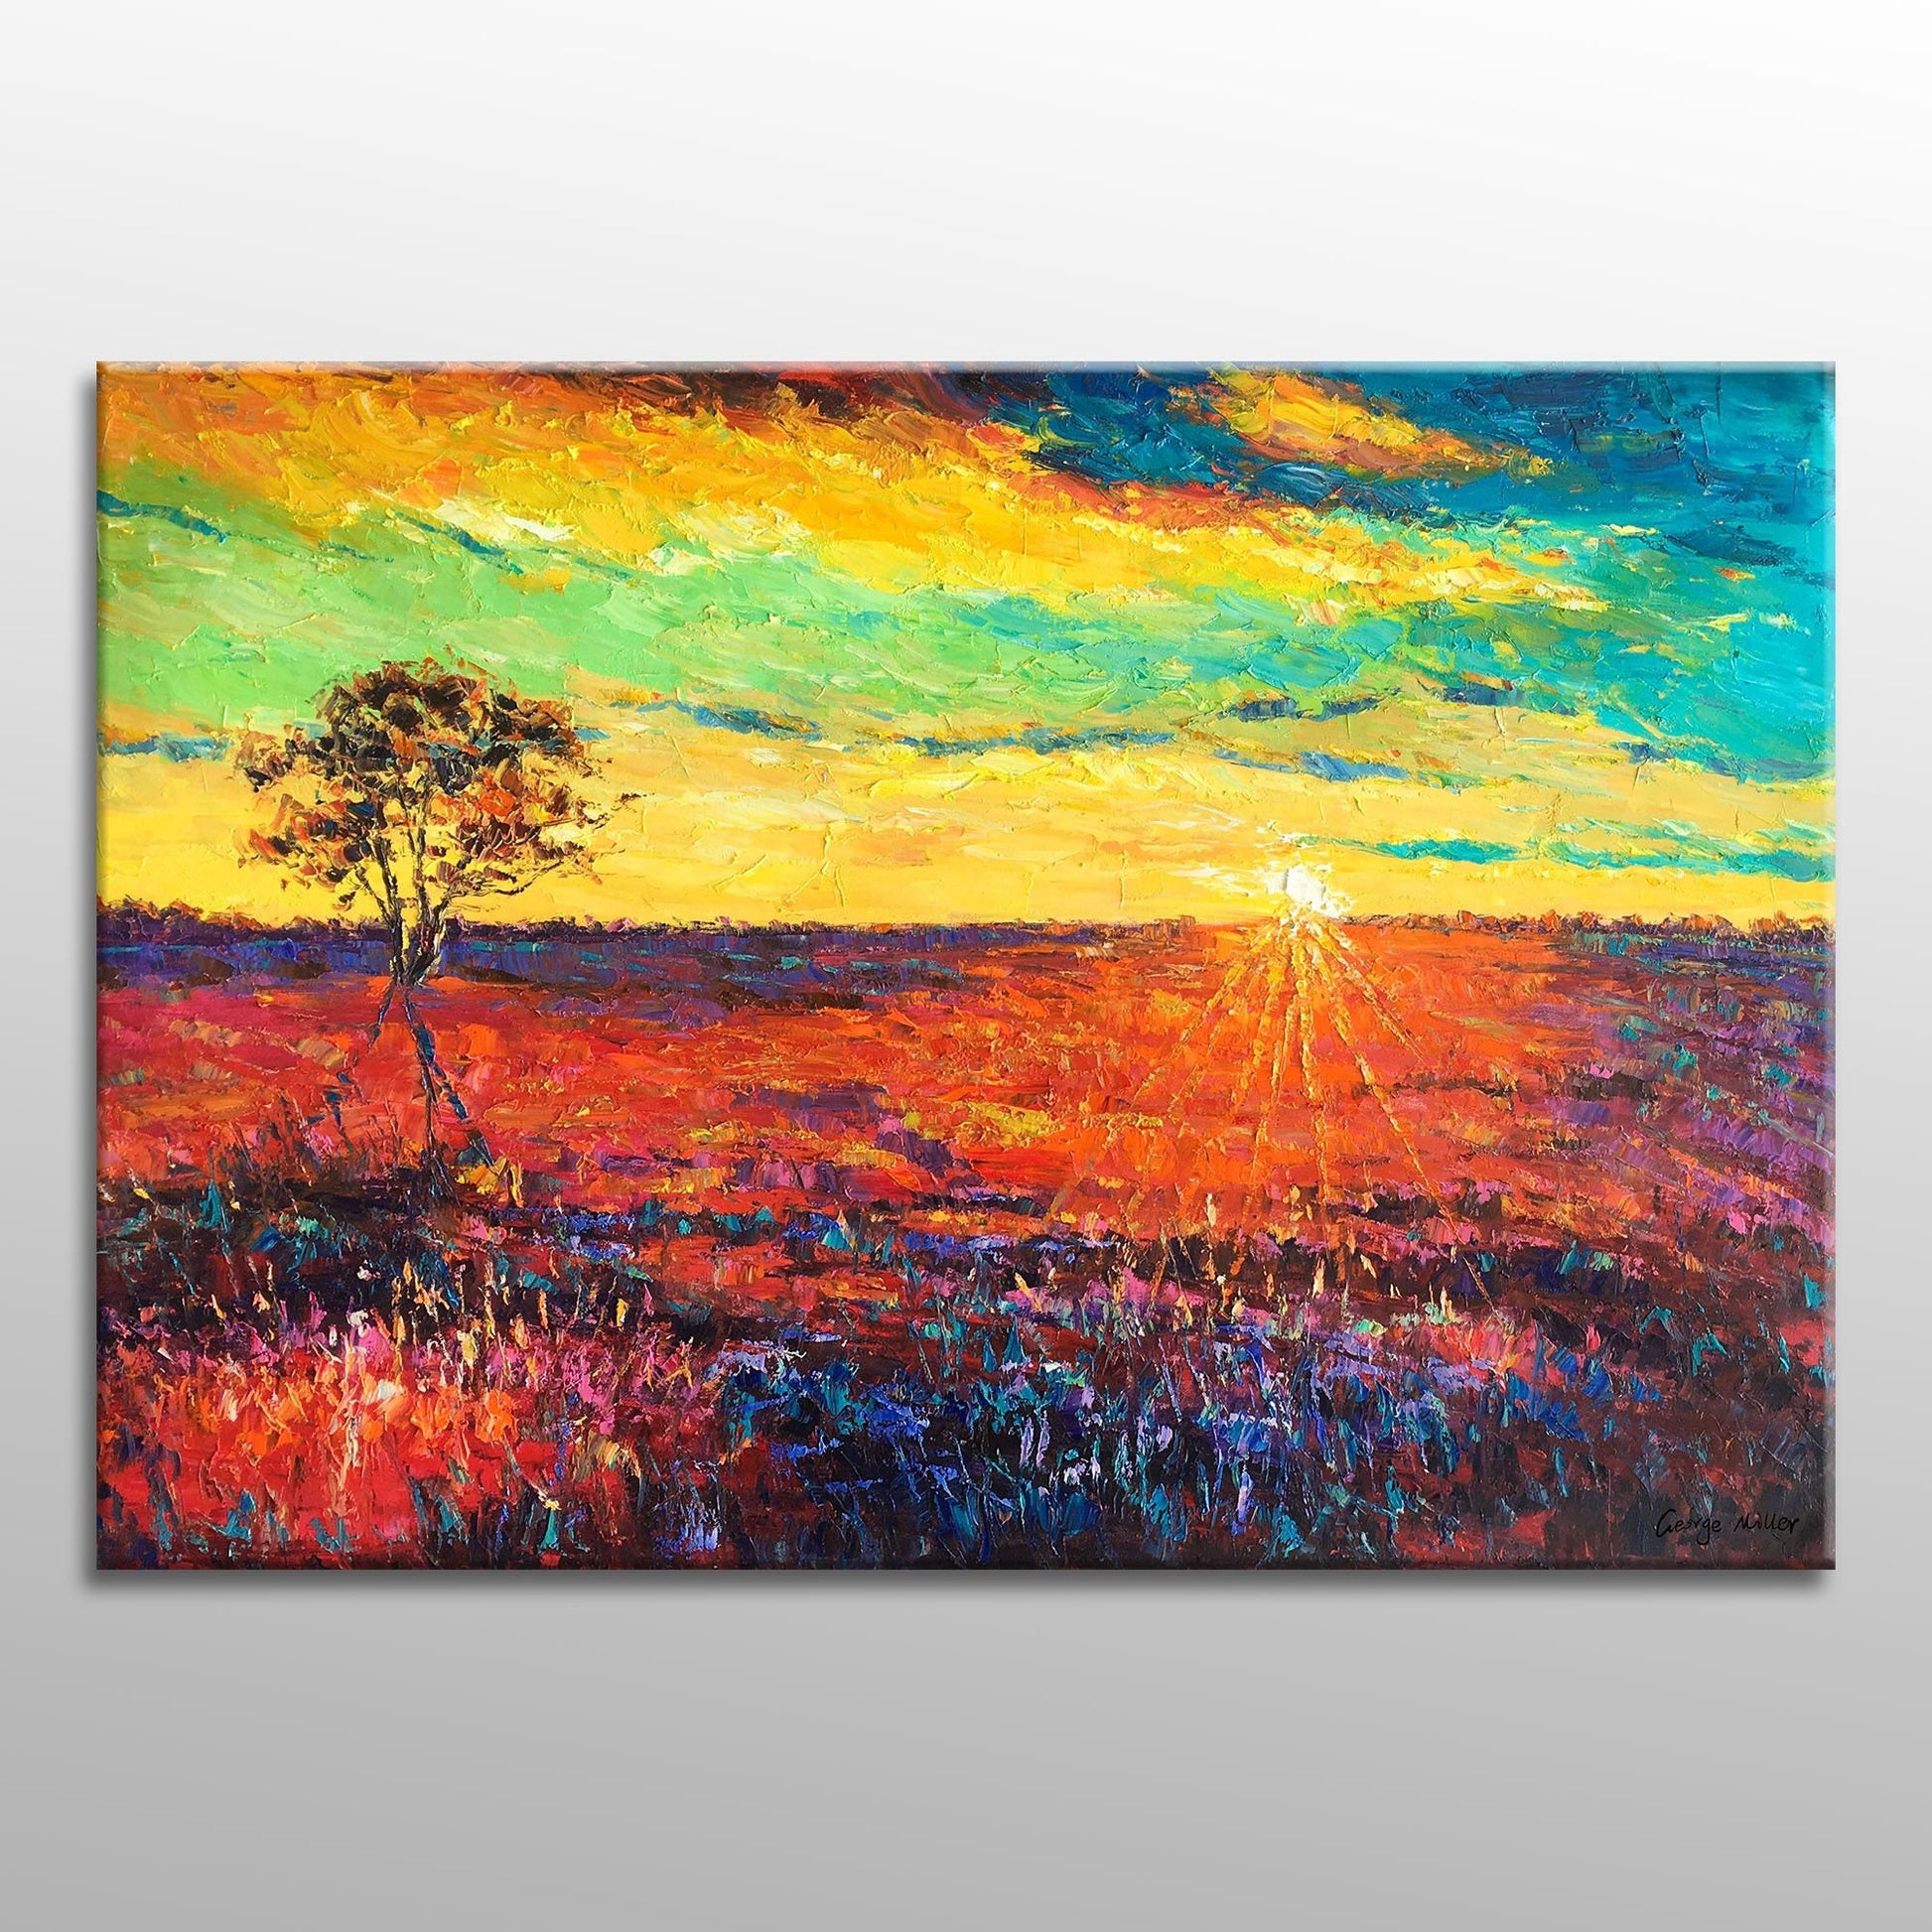 Landscape Oil Painting Tuscany Sunrise, Abstract Painting, Large Canvas Art, Modern Art, Original Oil Painting, Wall Decor, Palette Knife